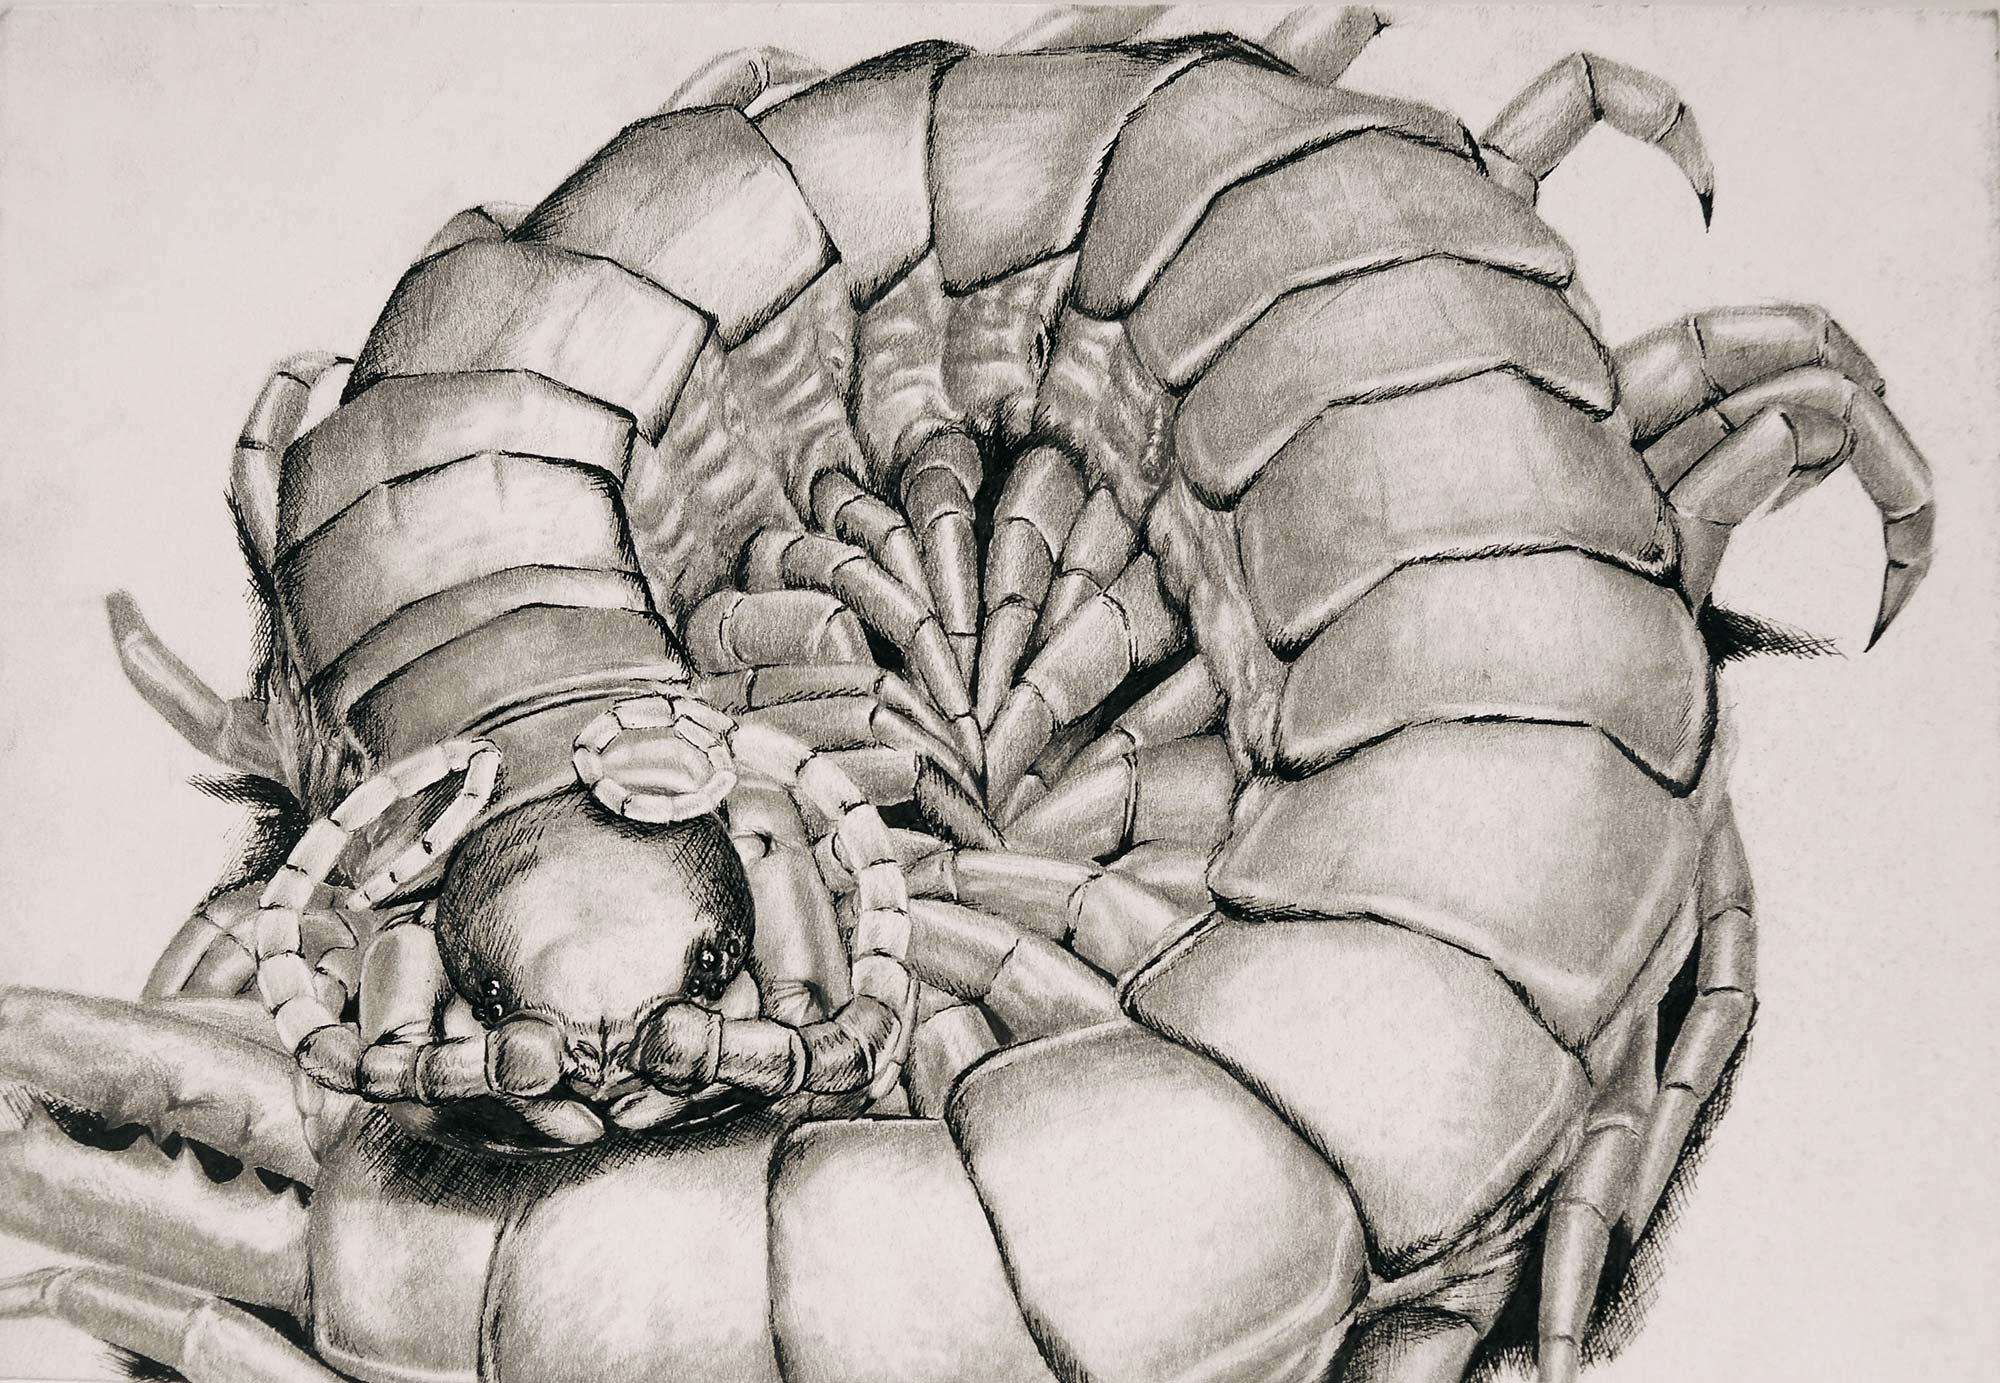 A drawing by Perdong Lin of a crustacean